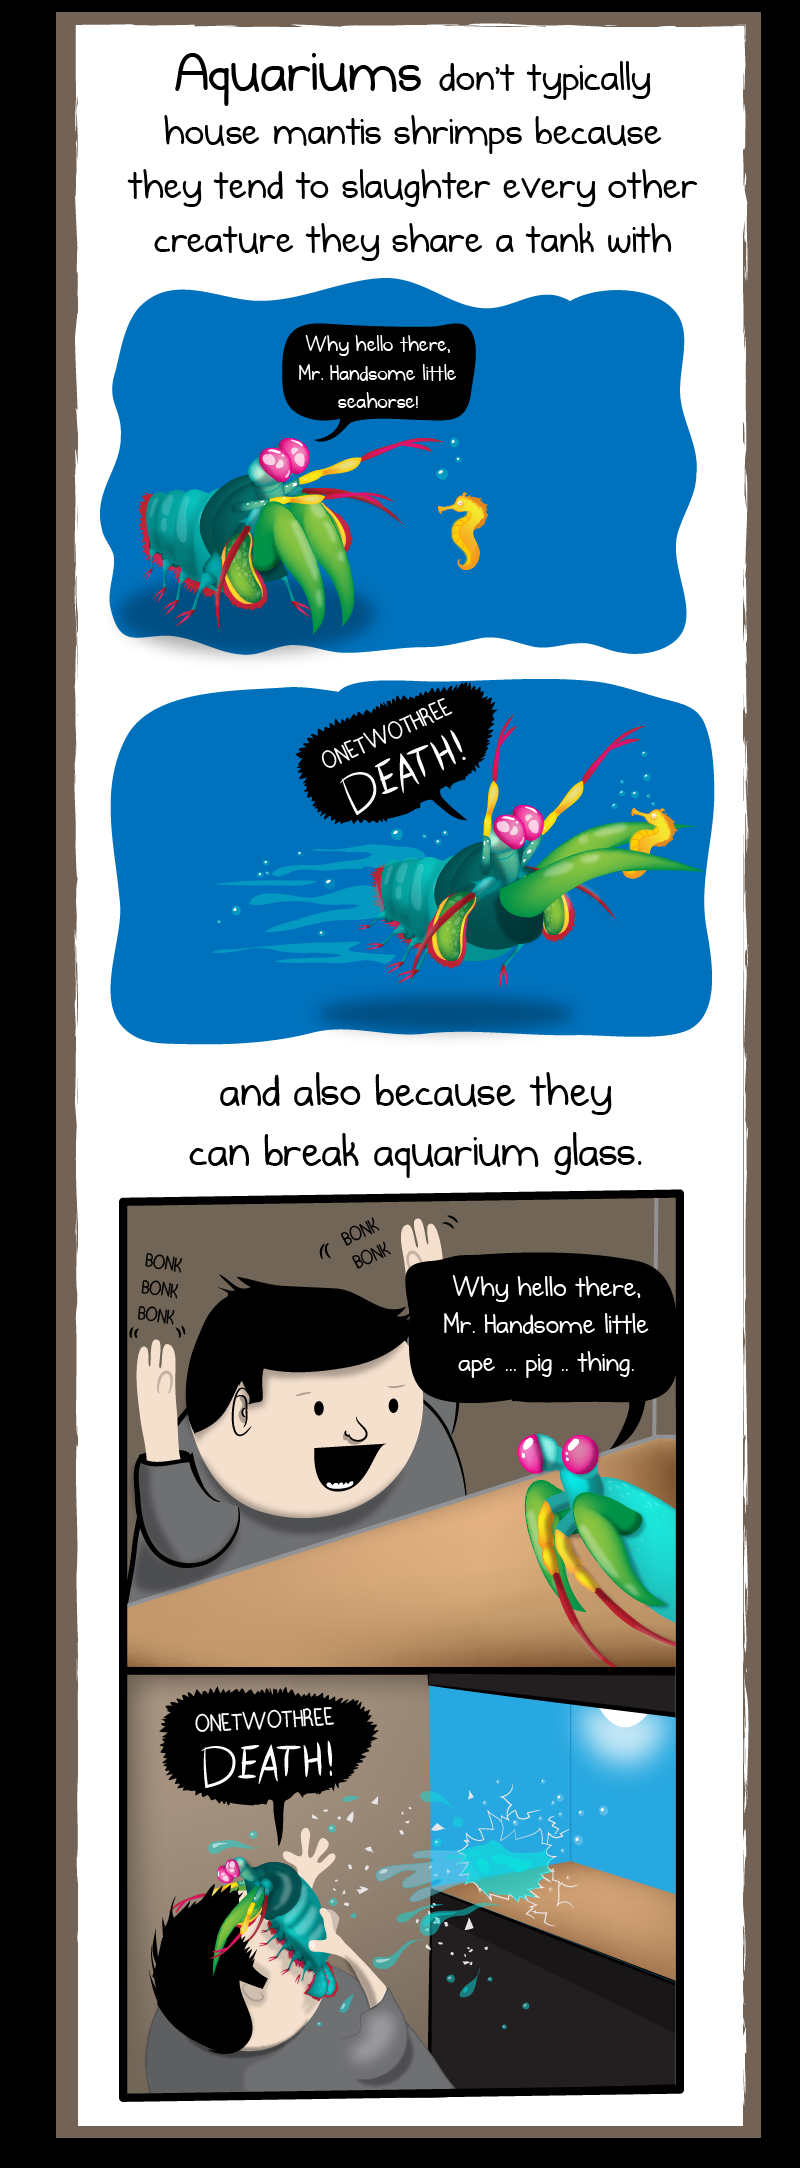 Why the mantis shrimp is my new favorite animal - The Oatmeal